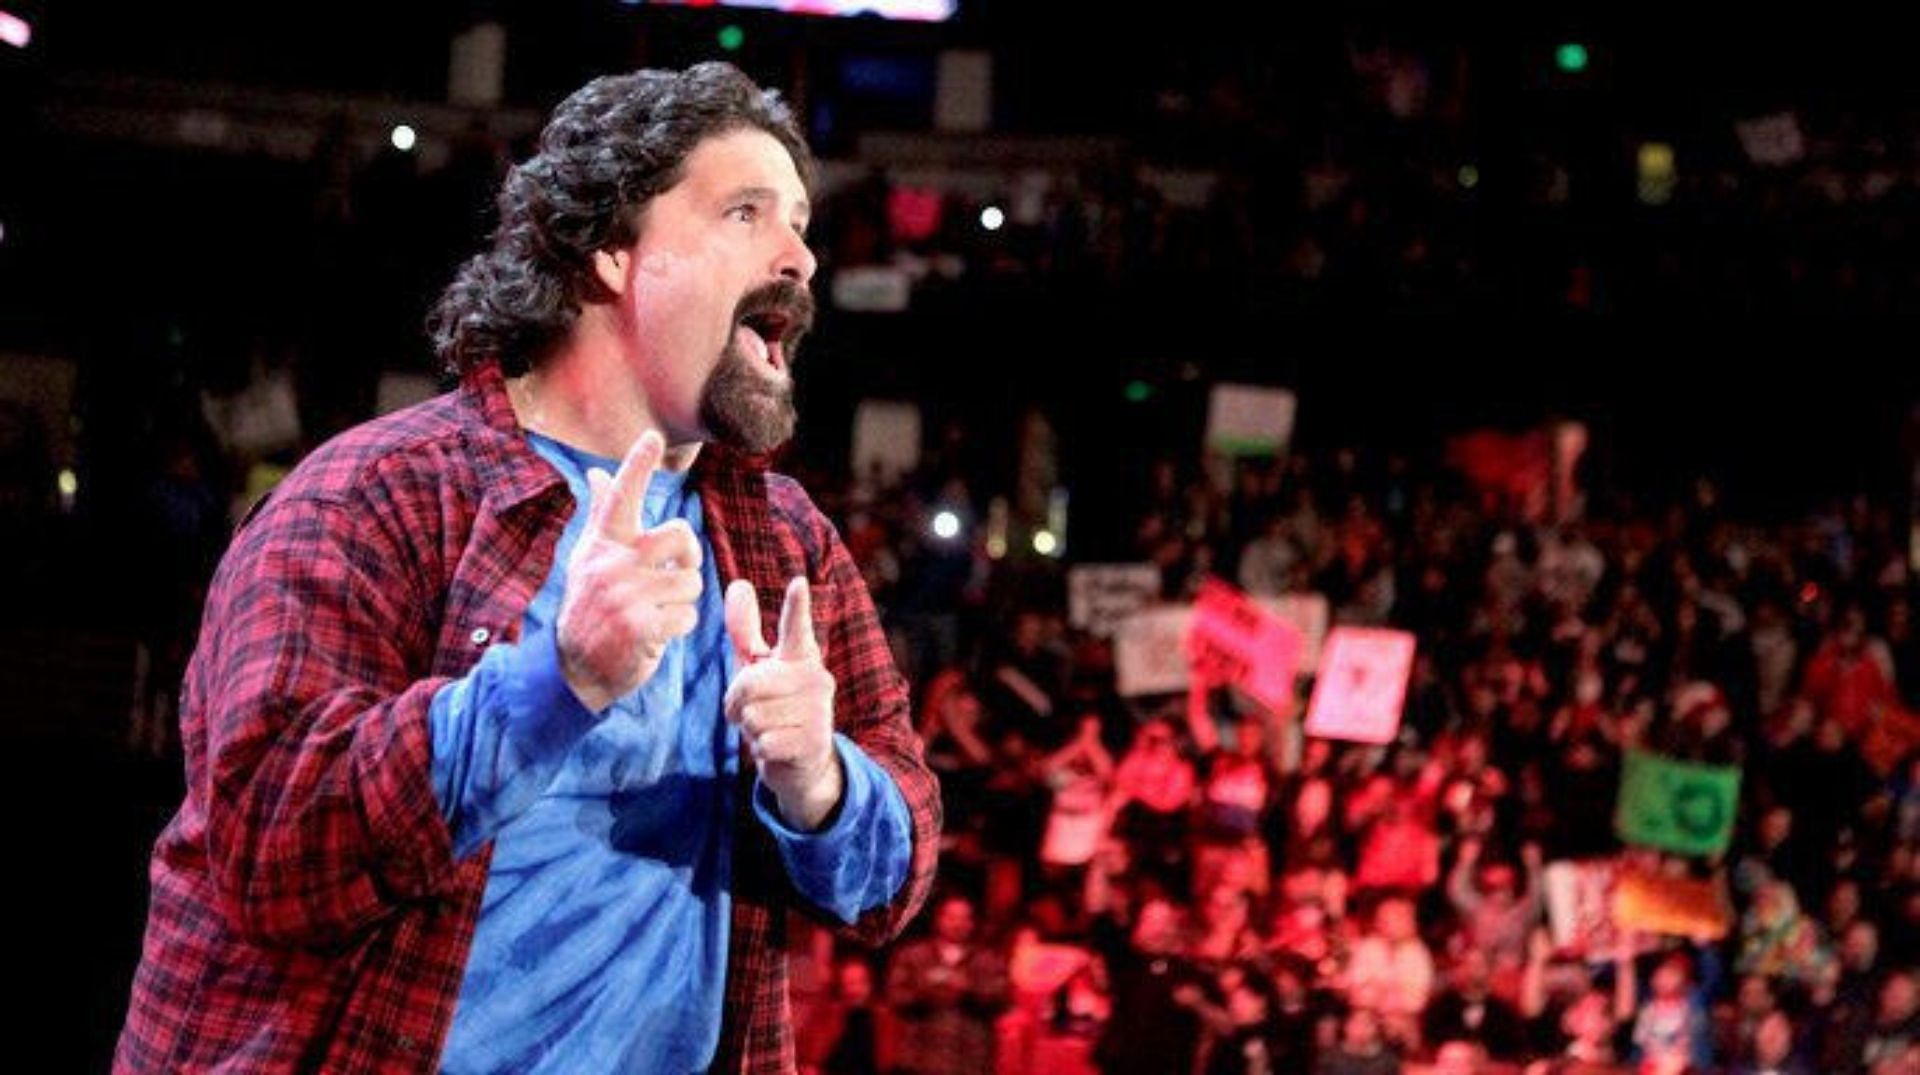 What is your favorite Mick Foley match?